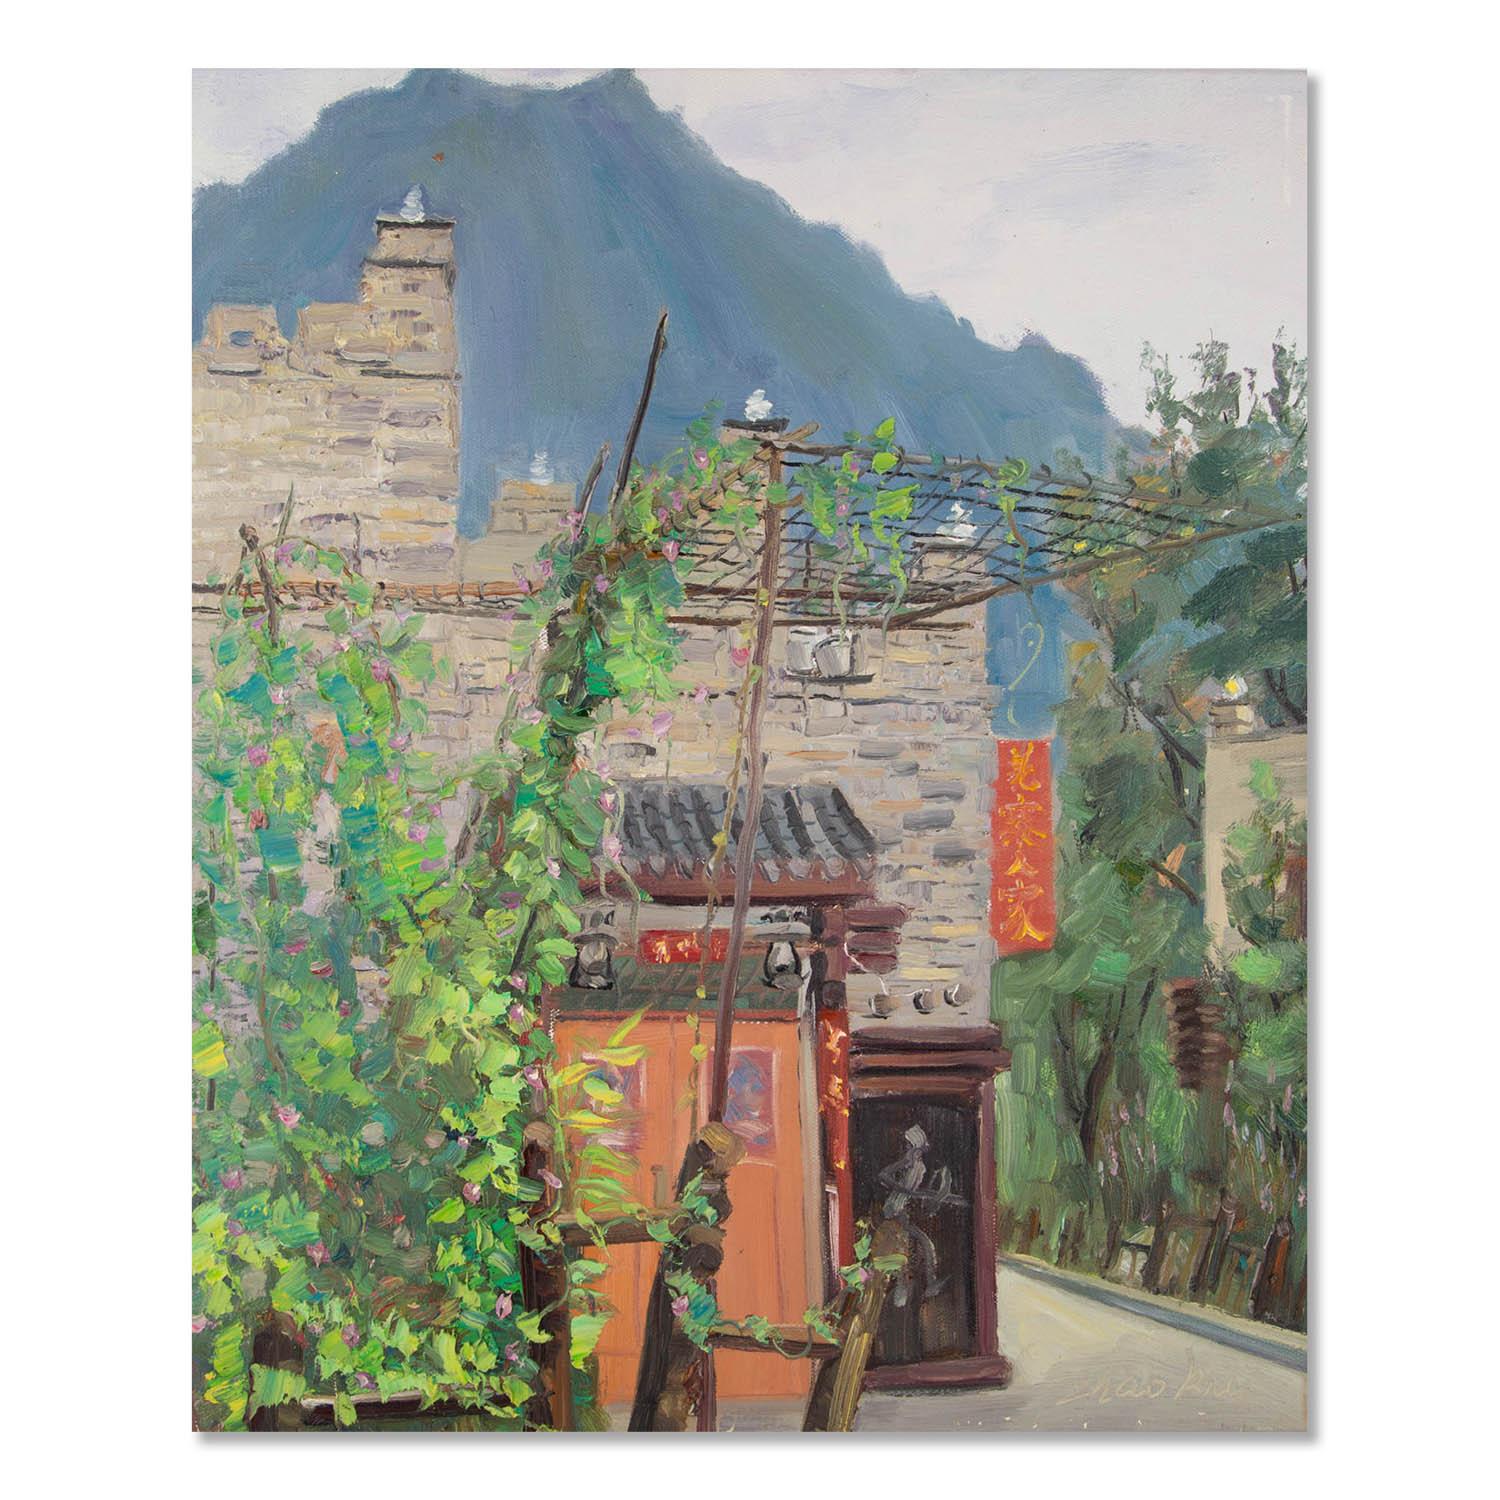 This painting depicts a serene countryside scene from China. The red Duilian on the door in the foreground catches the viewer's eye and adds a touch of liveliness to the otherwise tranquil setting. The overall mood of the painting is one of peaceful